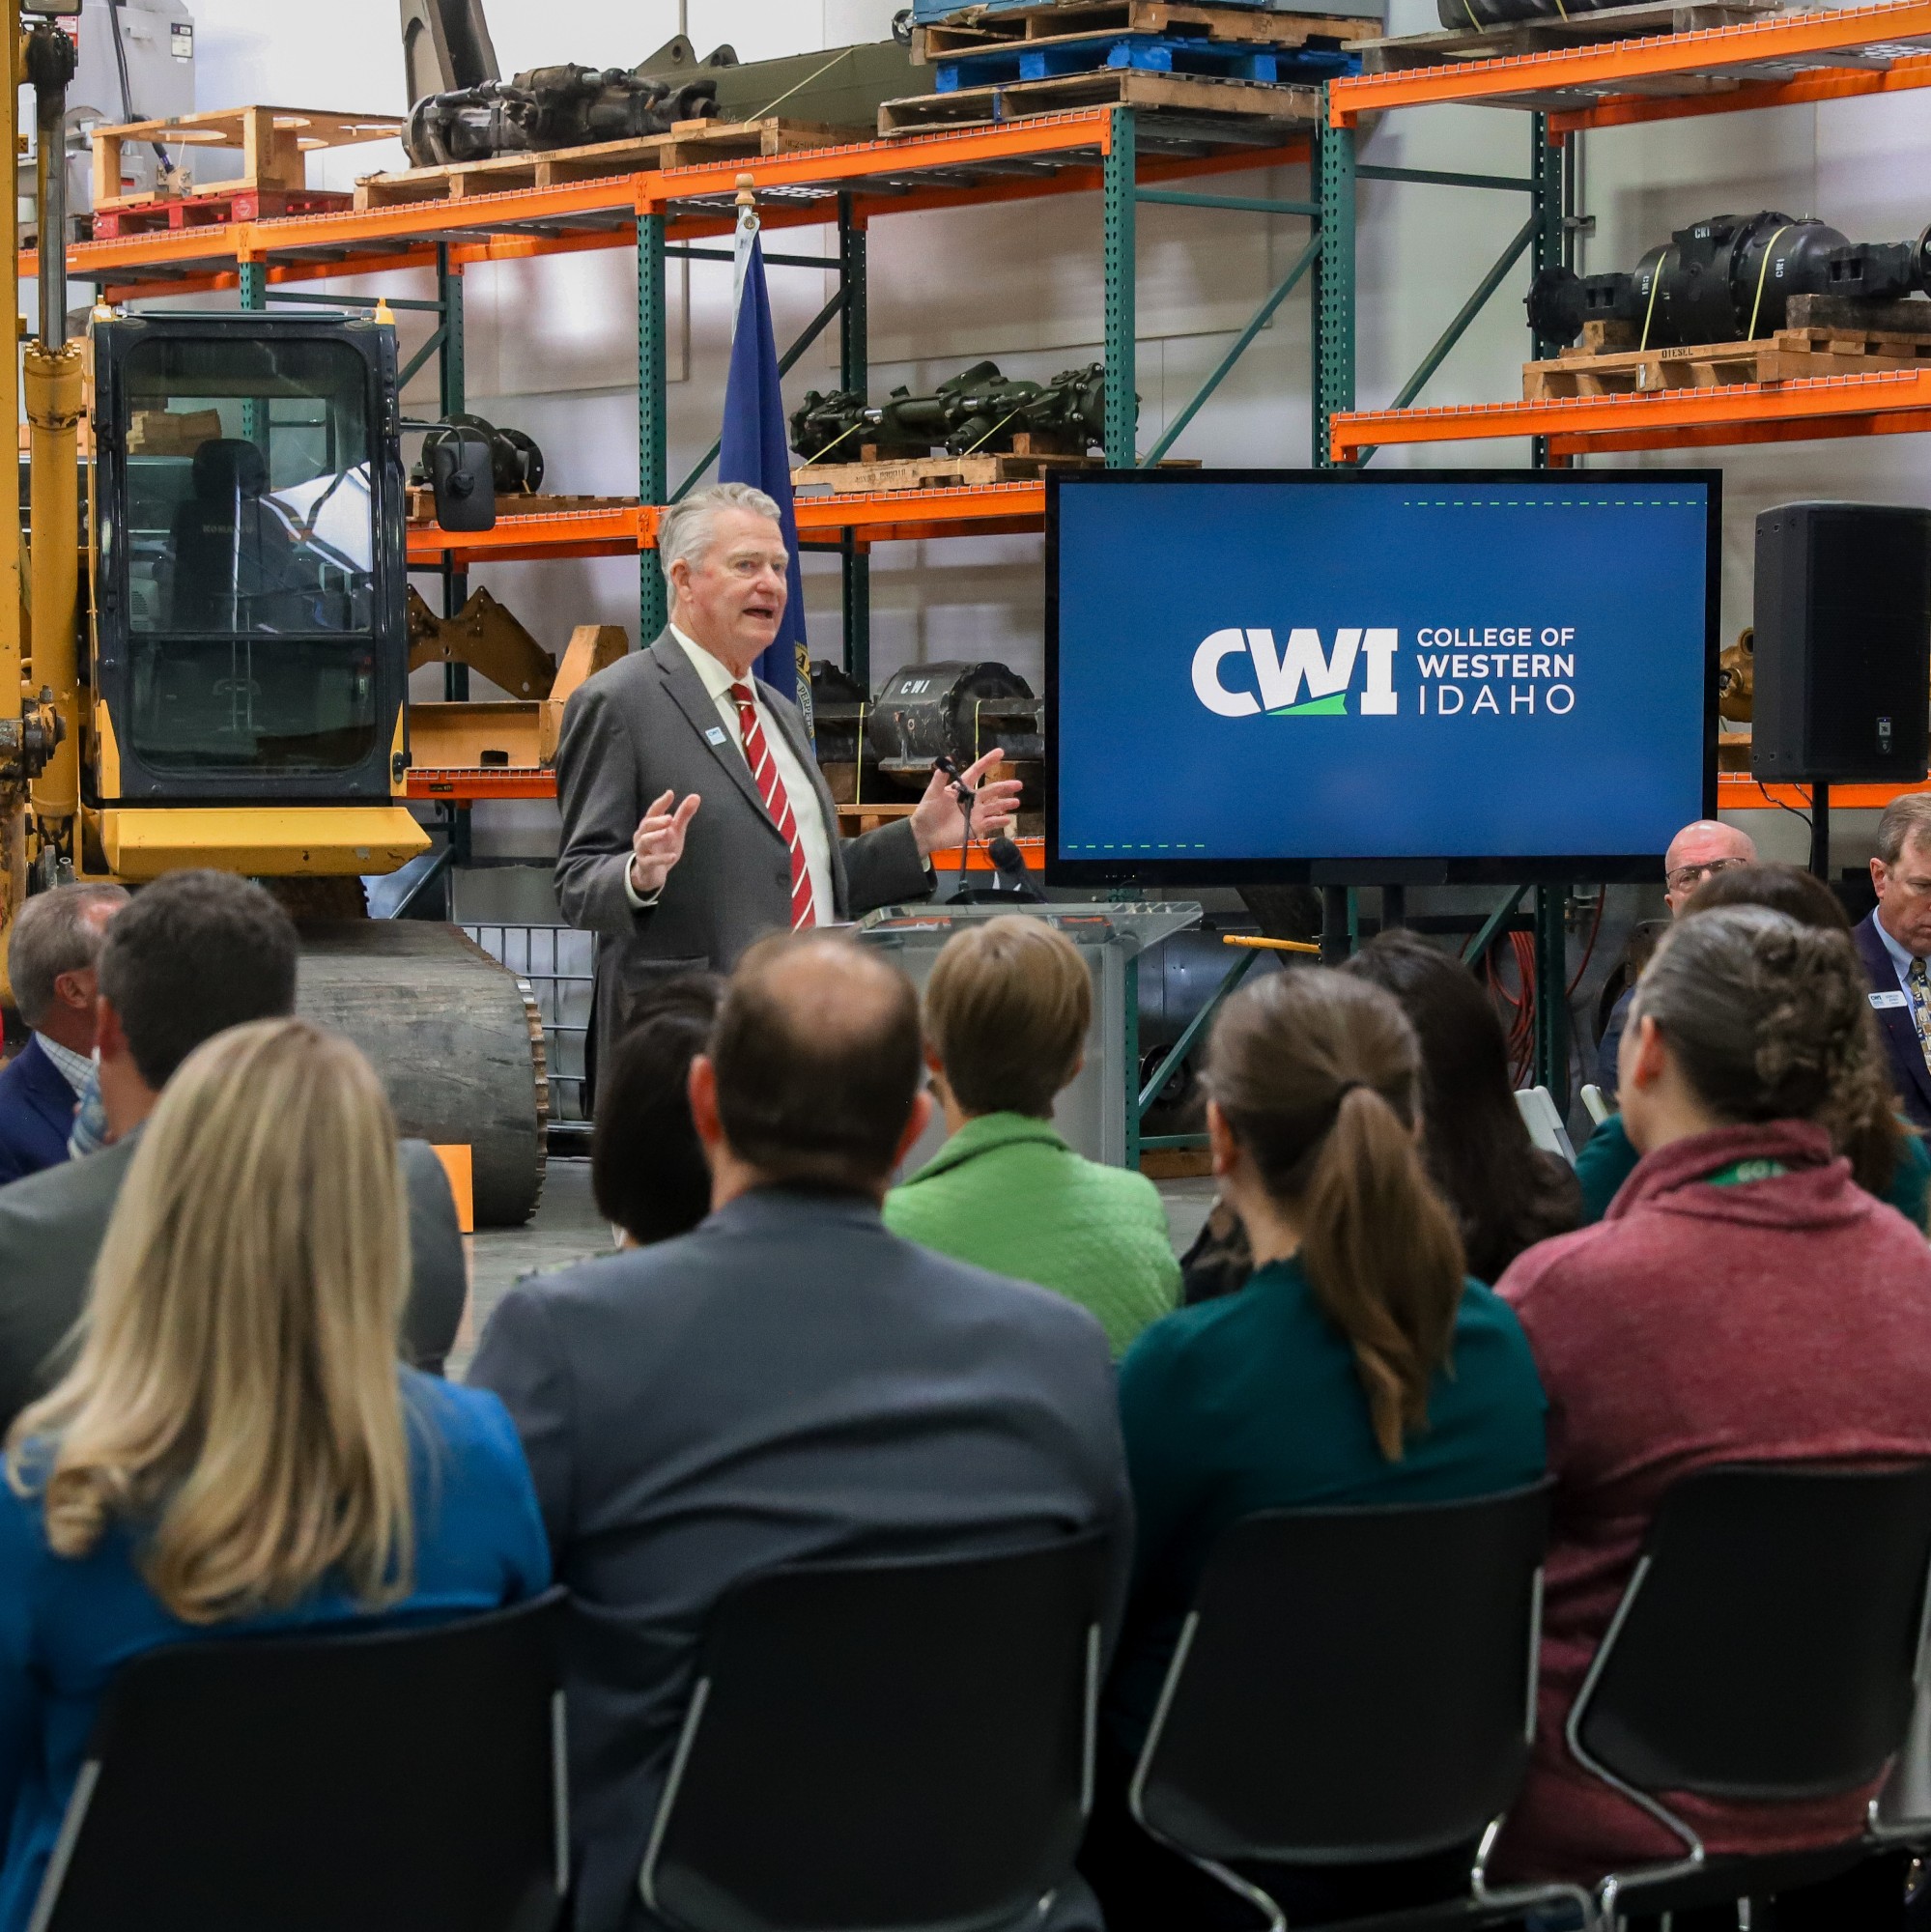 Governor Little speaking in front of audience at CWI